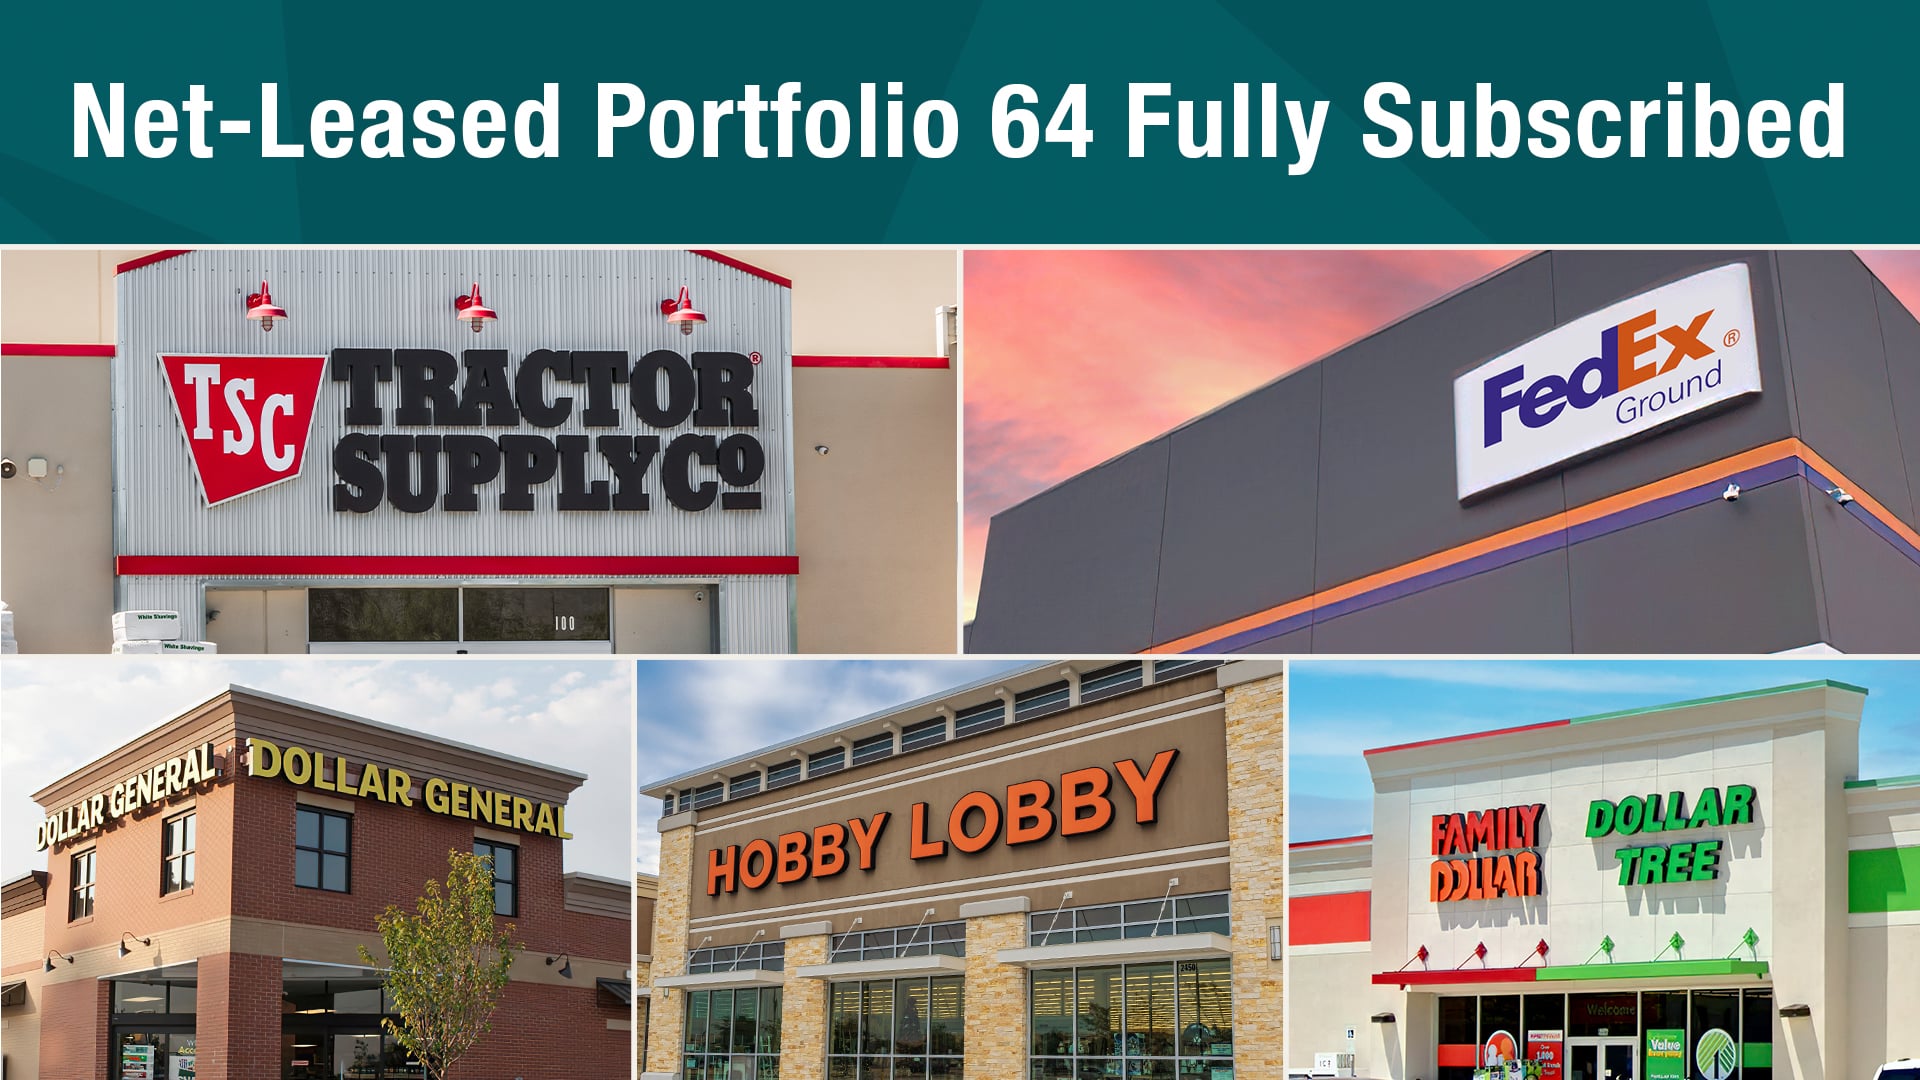 Net-Leased Portfolio 64 DST: Fully Subscribed